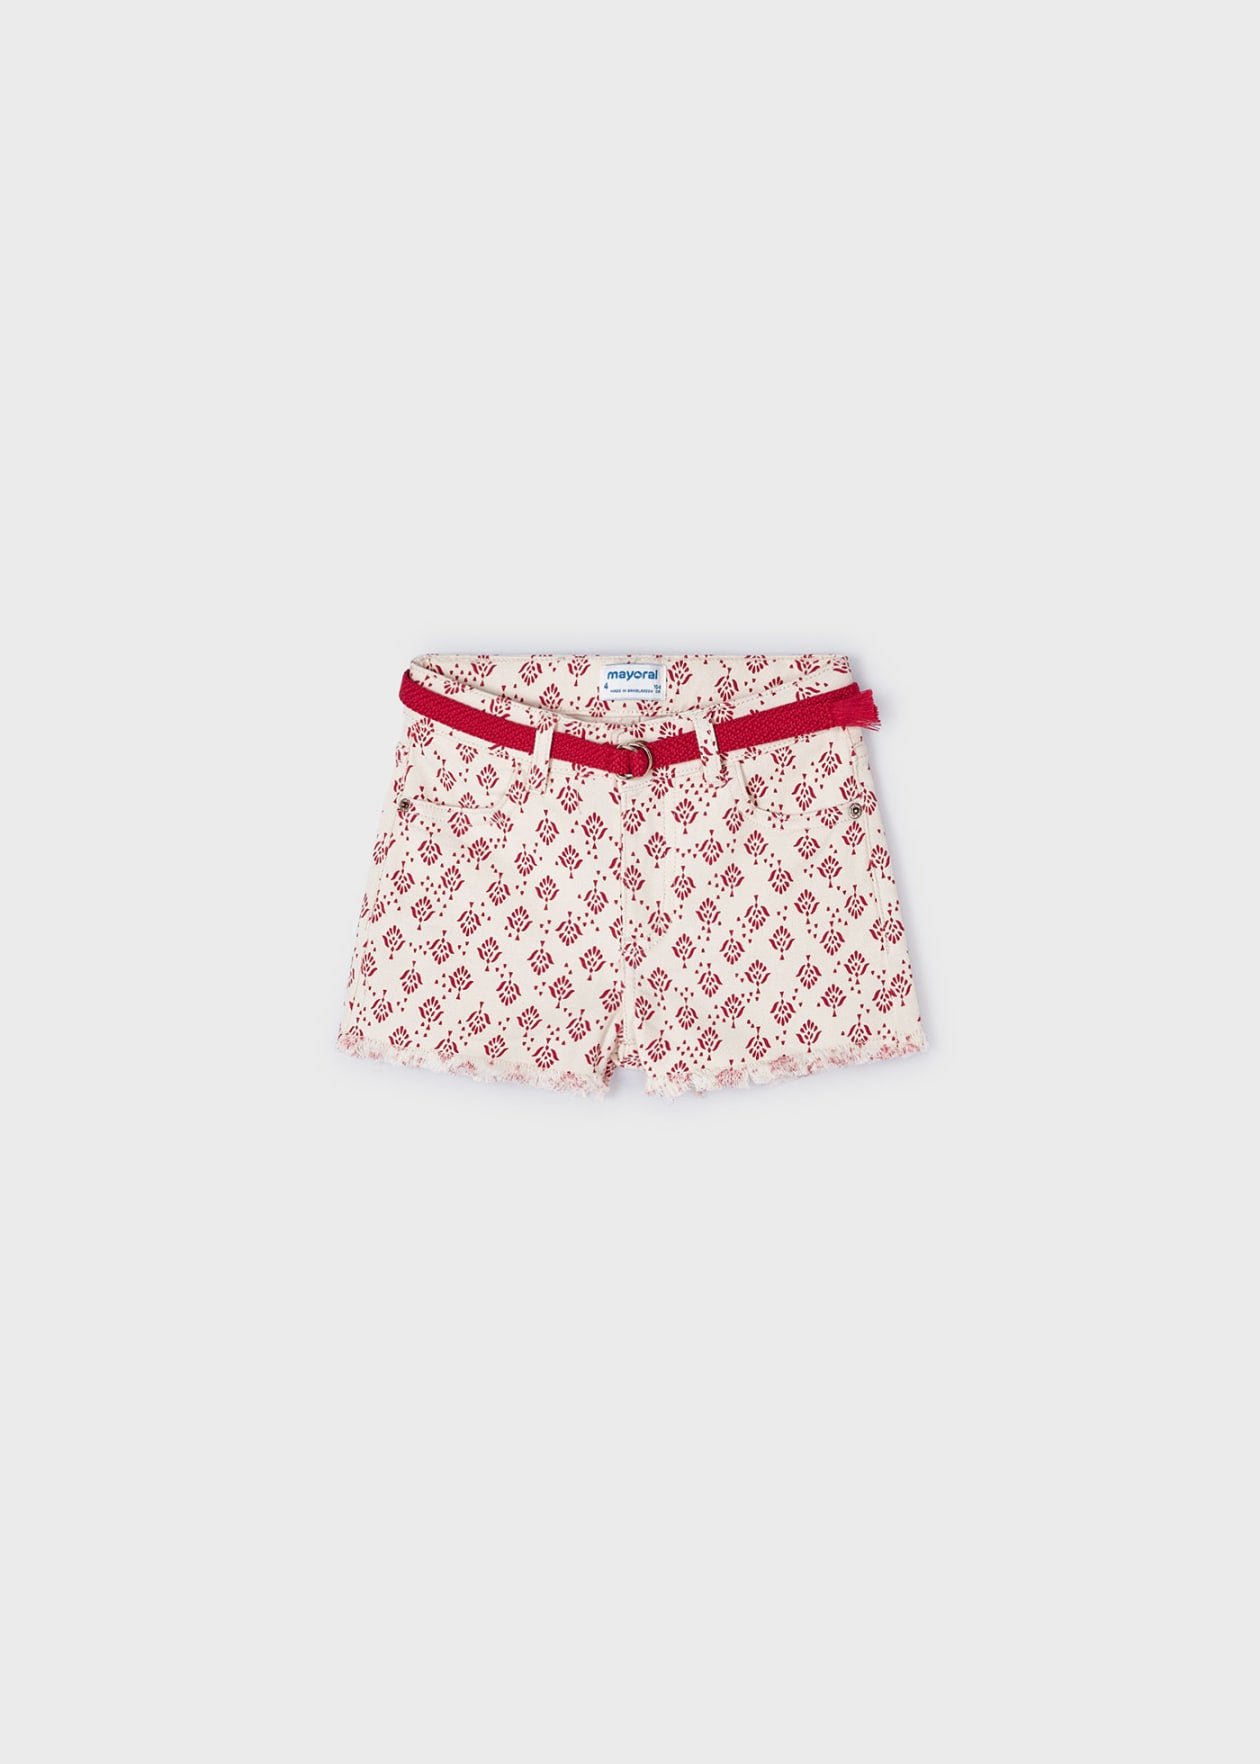 Chickpea Shorts